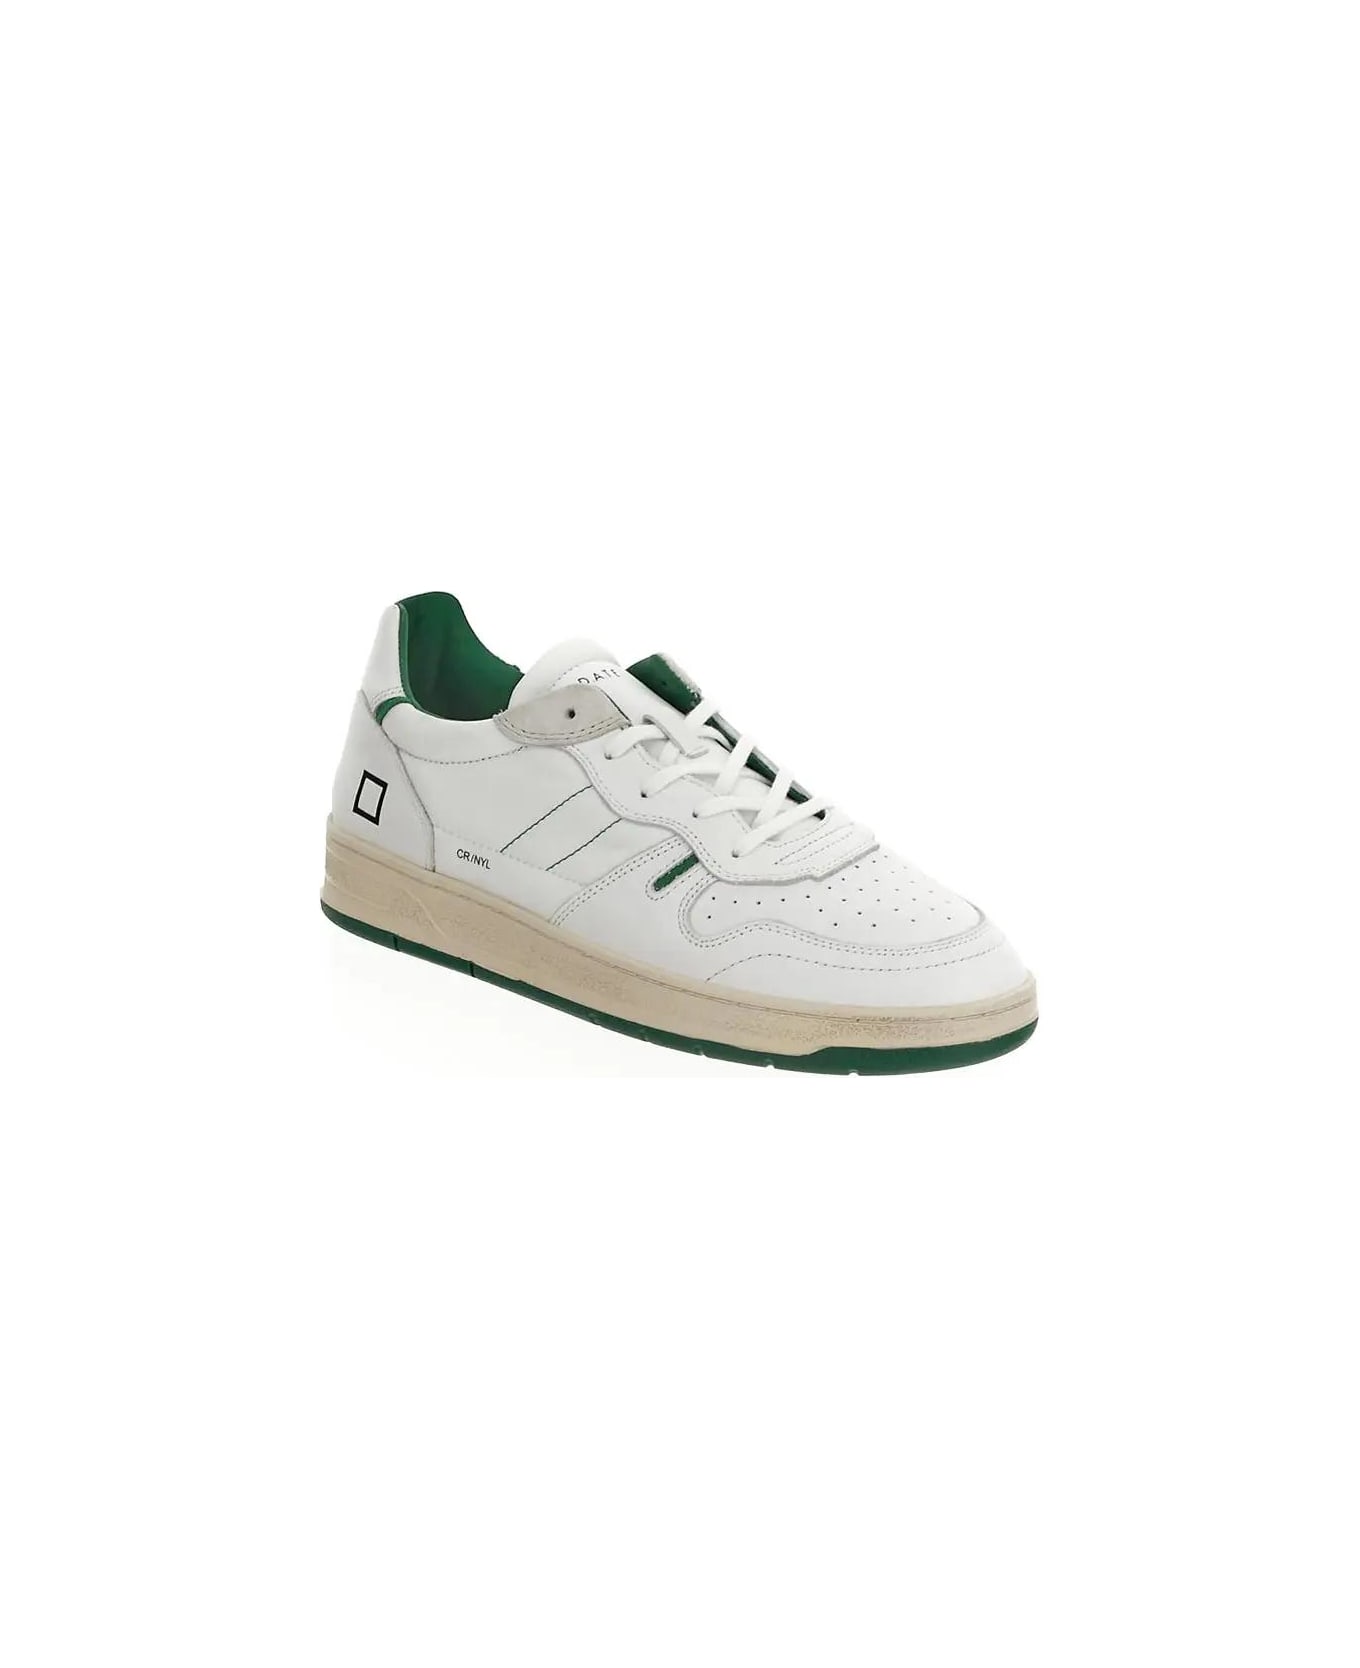 D.A.T.E. Court 2.0 Sneakers - Bianco